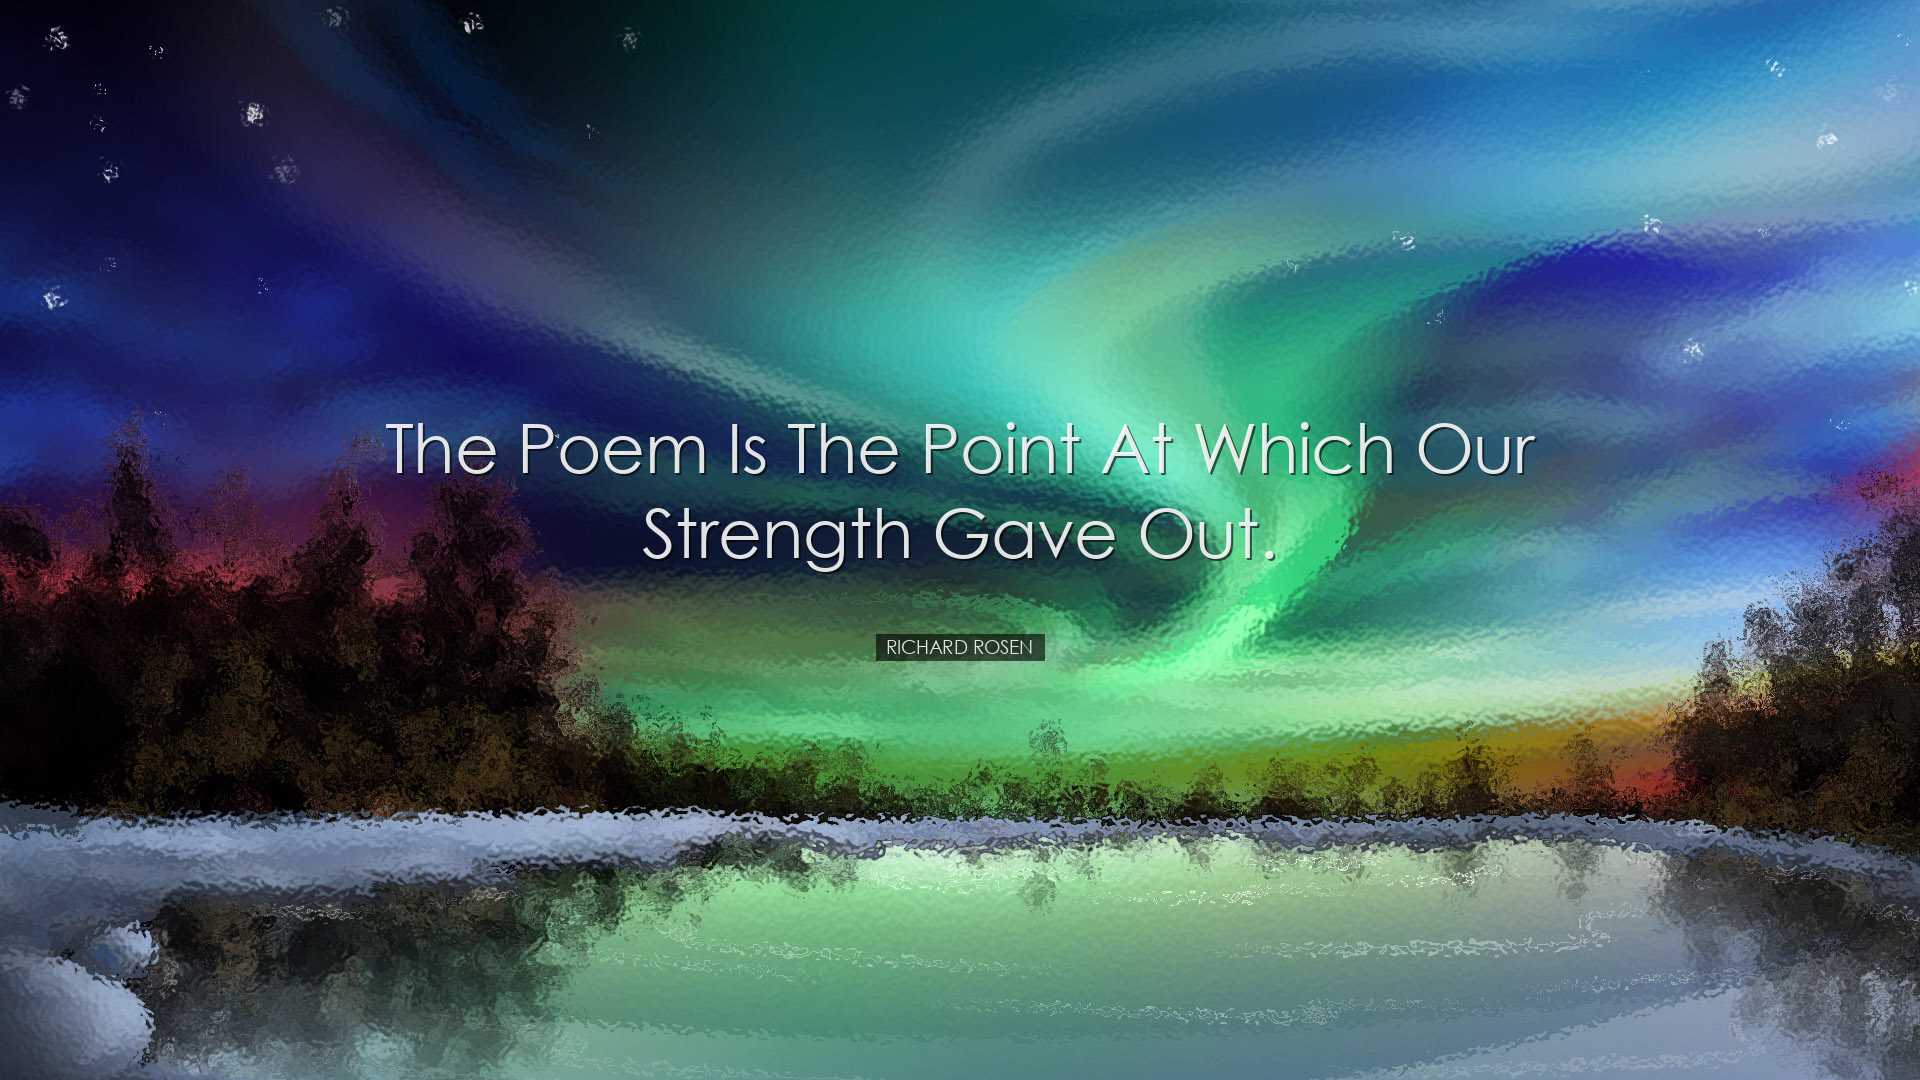 The poem is the point at which our strength gave out. - Richard Ro